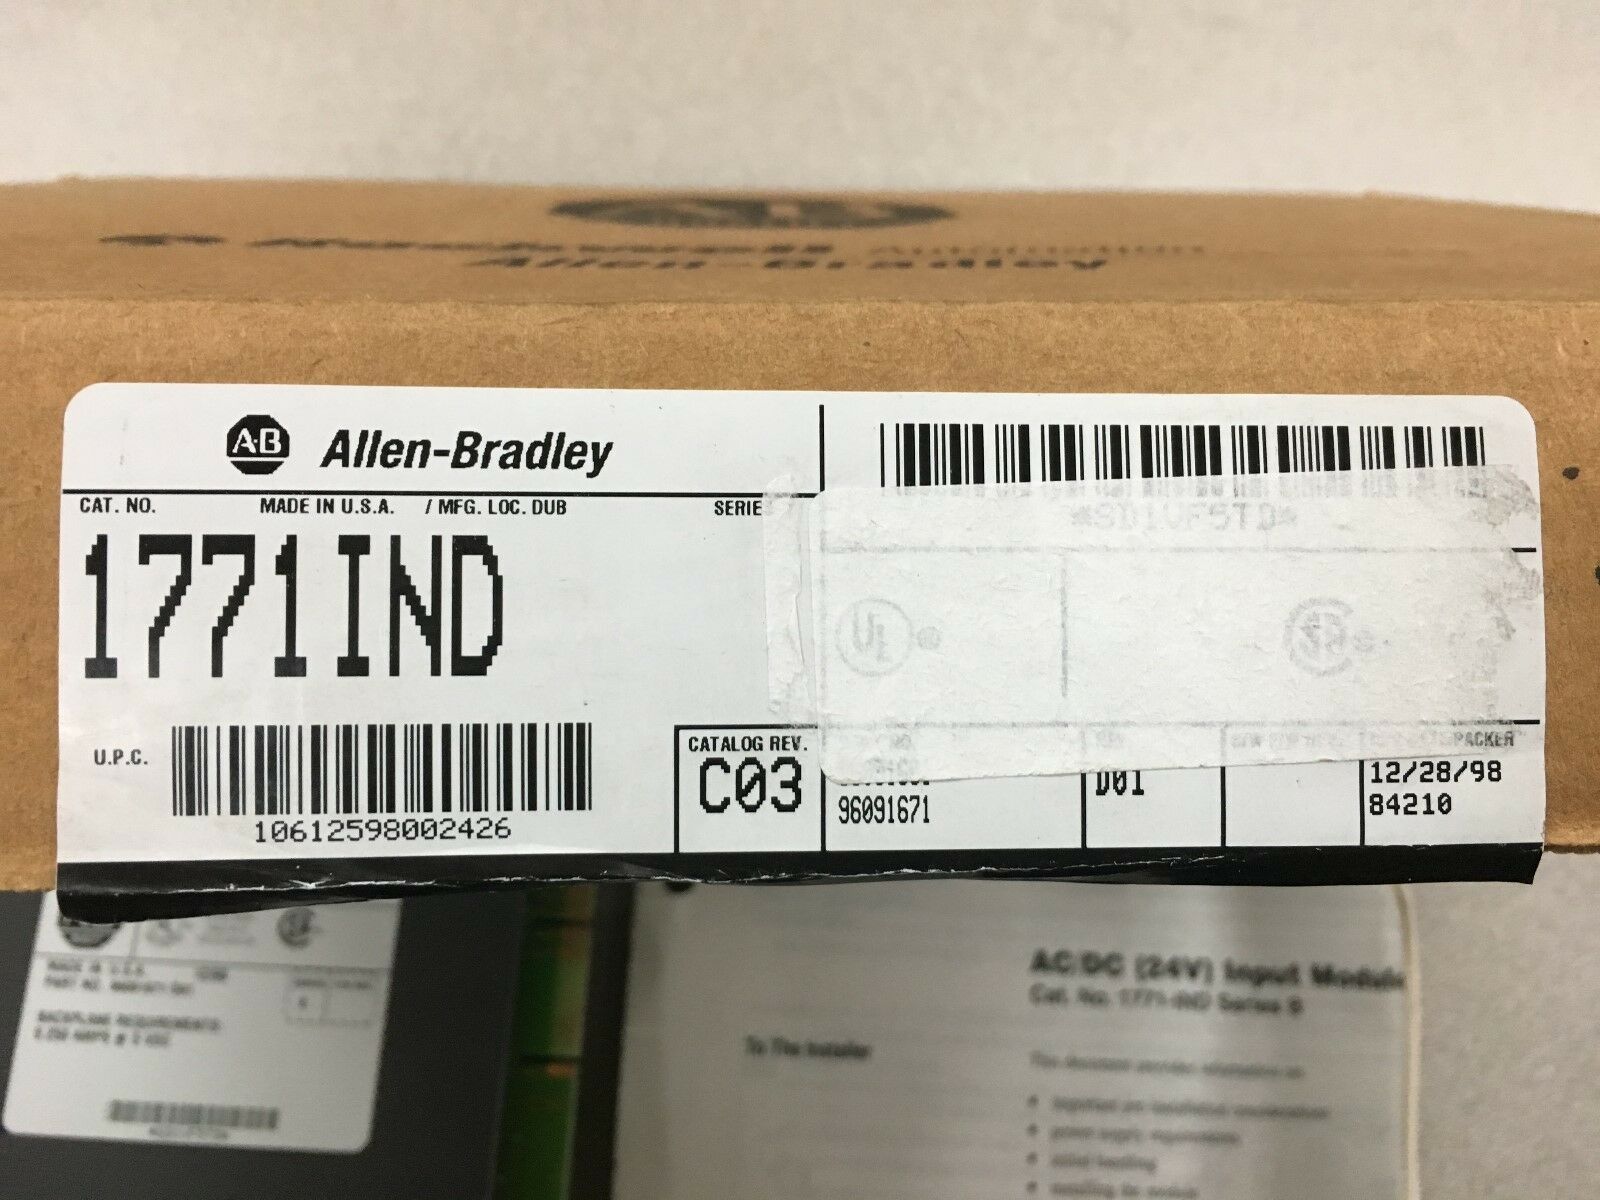 NEW IN BOX ALLEN-BRADLEY PLC-5 INPUT MODULE 1771-IND WITH 1771-WH SWING ARM